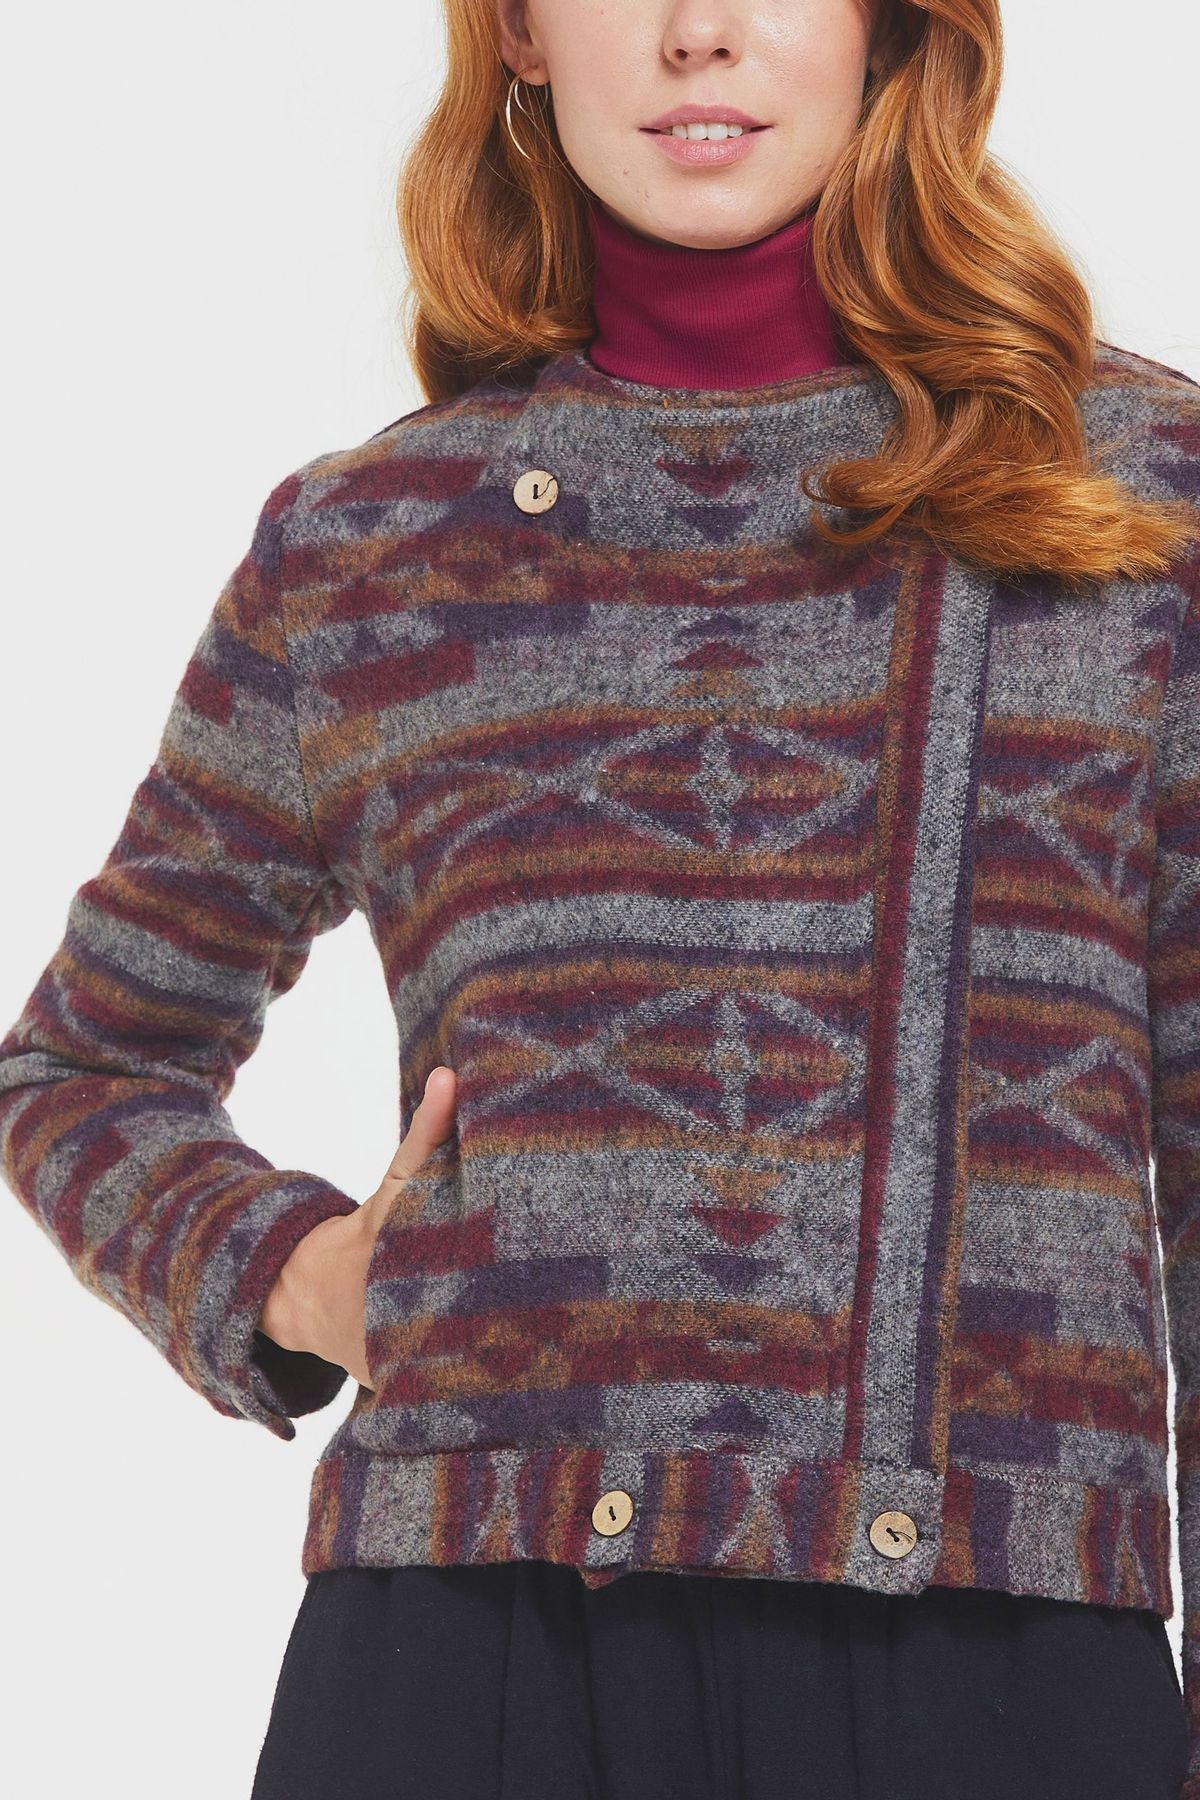 Ethnic Patterned Women's Jacket with Lining Purple